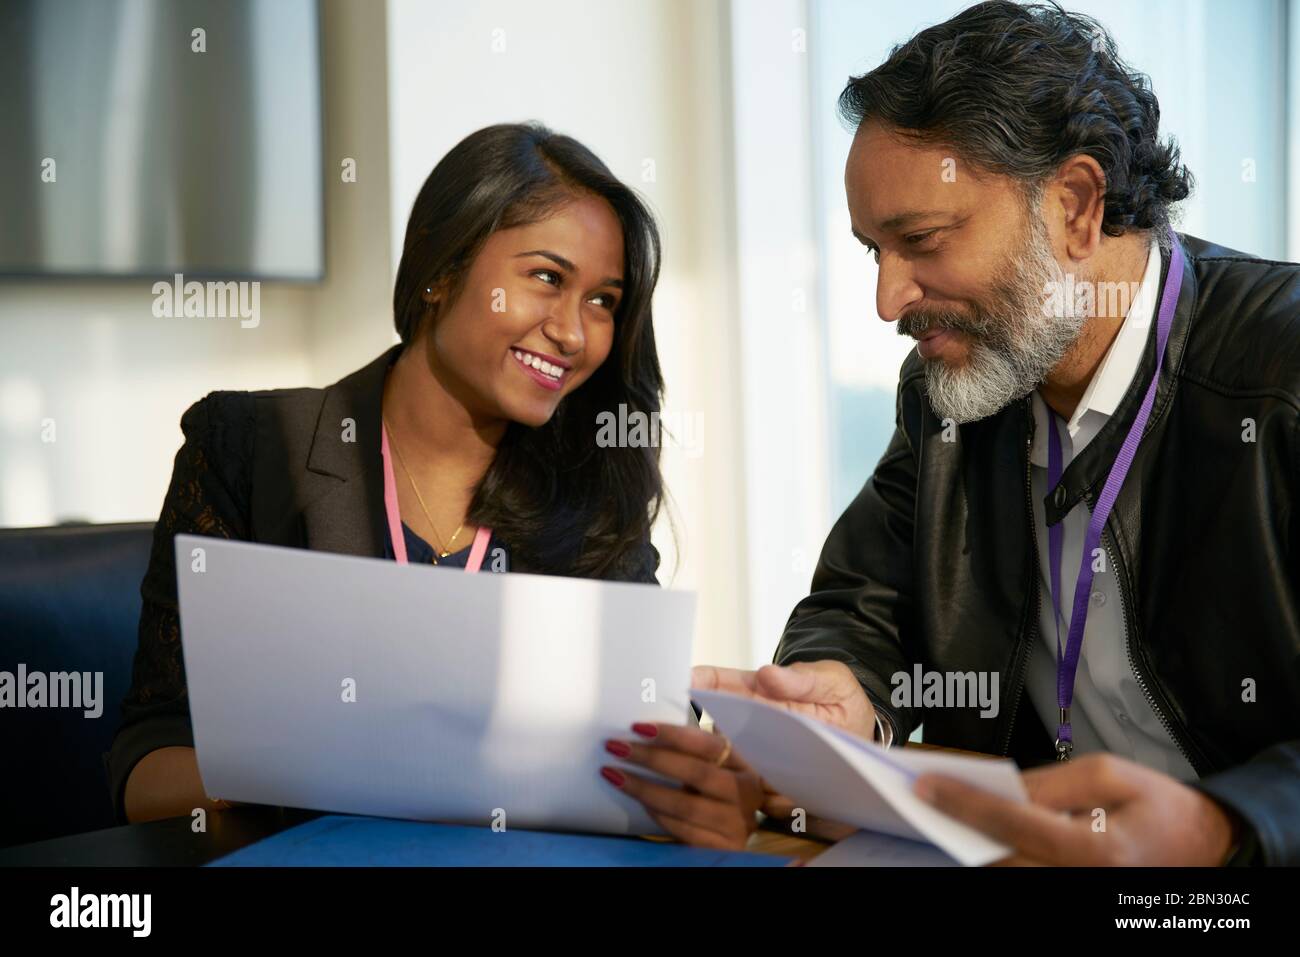 Smiling business people discussing paperwork in meeting Banque D'Images